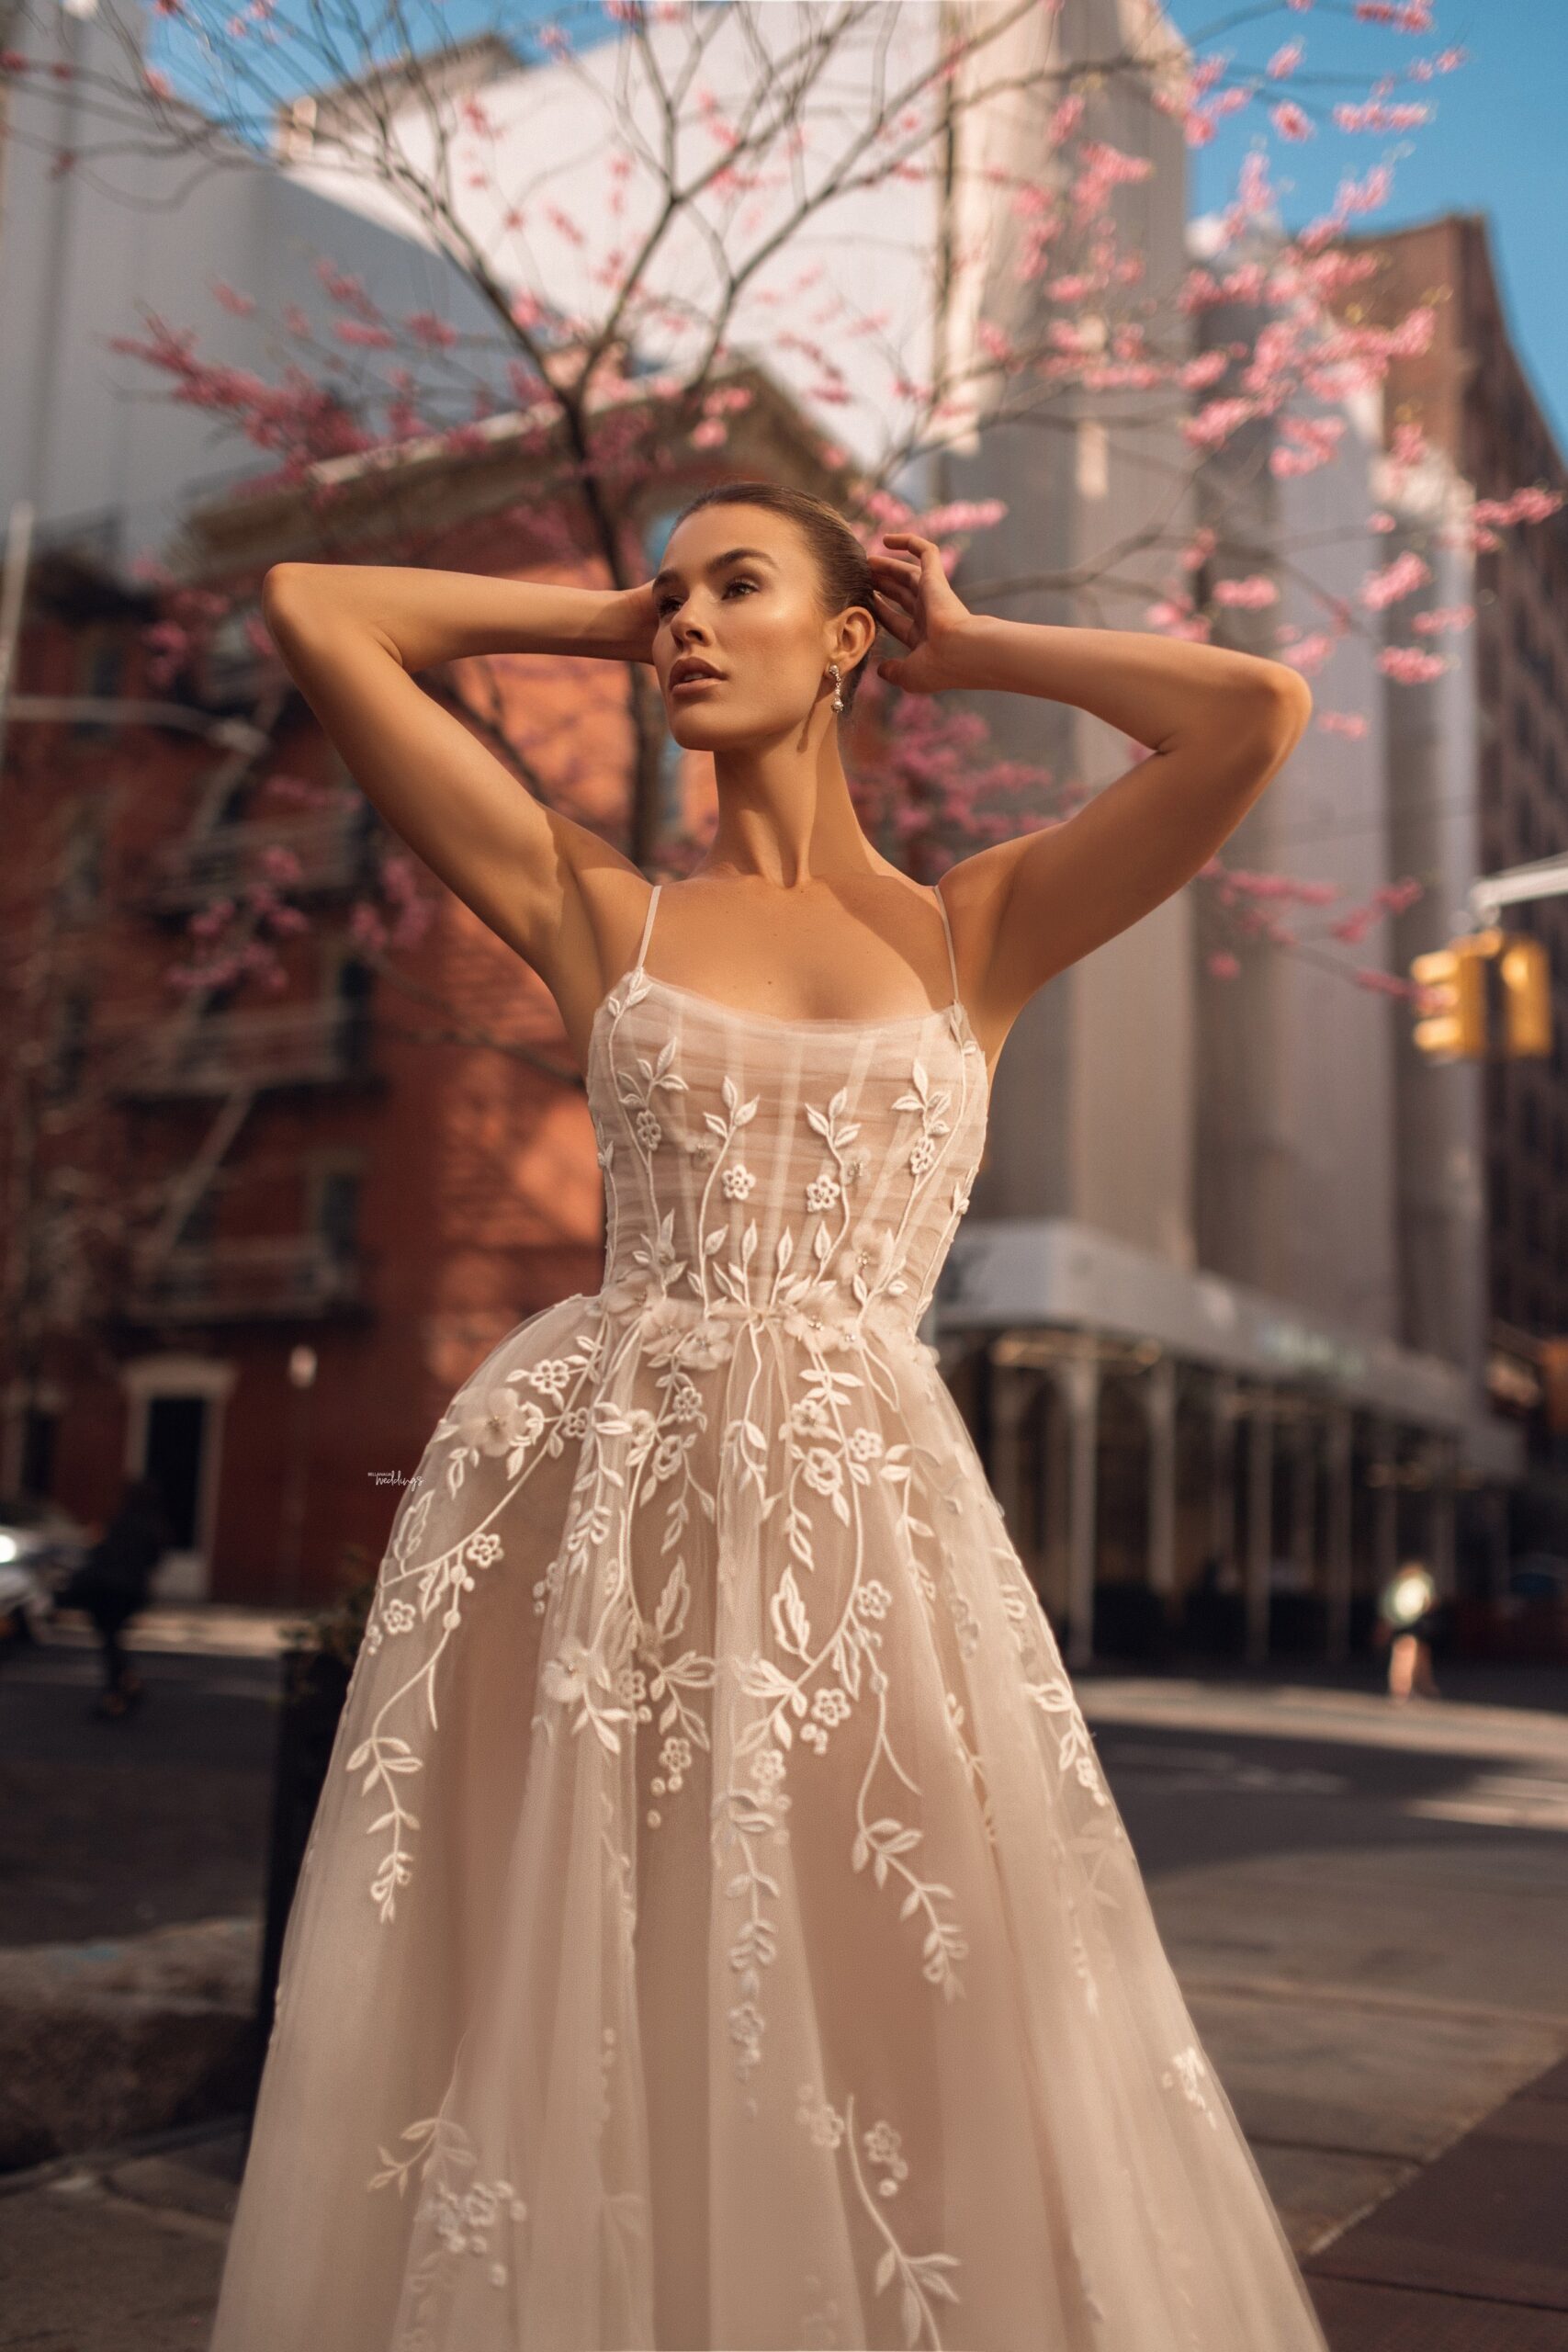 Chic Two-Piece Gowns Let Brides Design Their Own Wedding Dresses—So Fun! |  Glamour